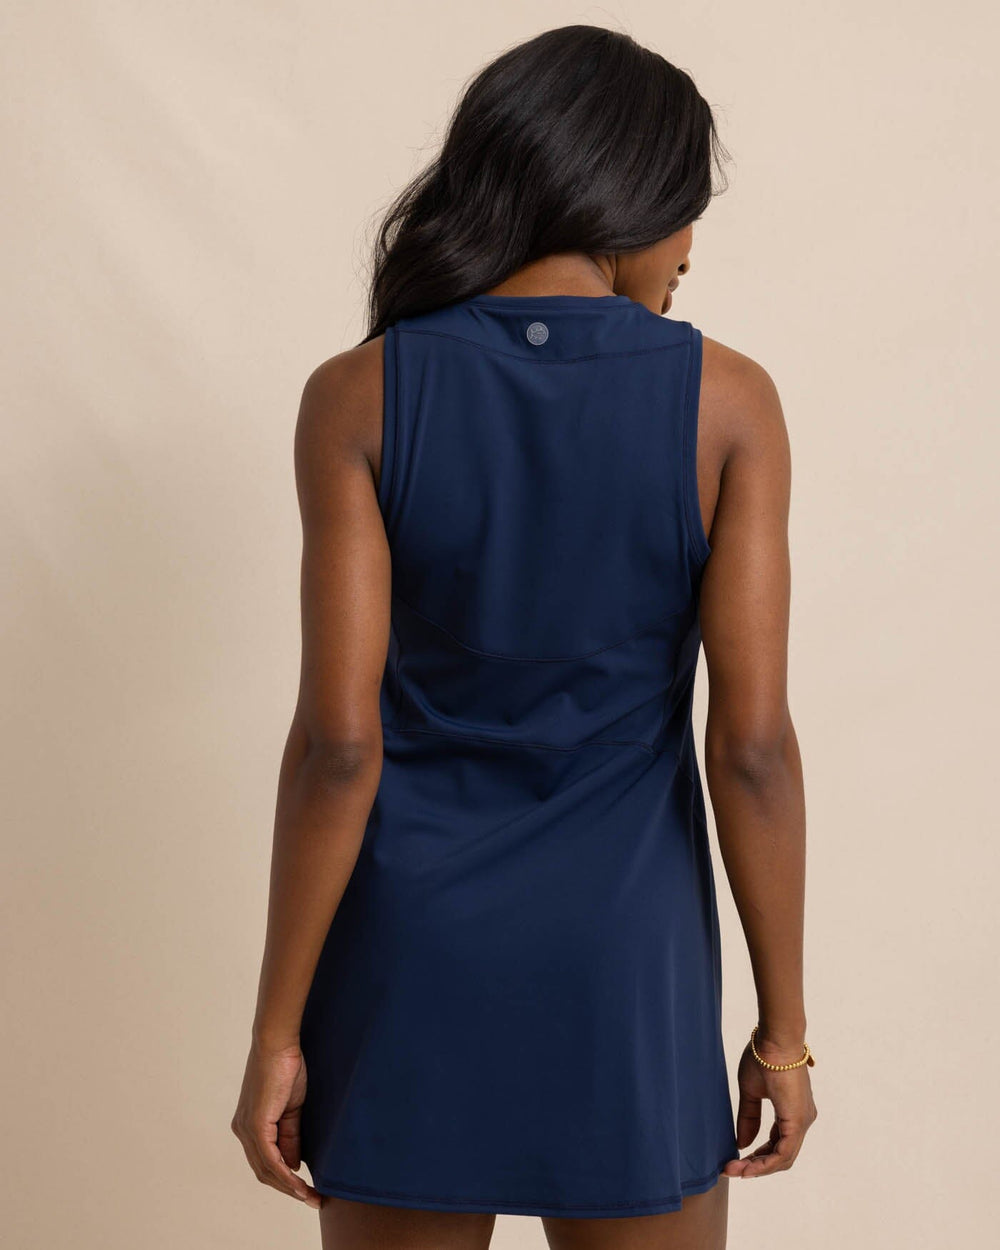 The back view of the Southern Tide Frances Zip Front Performance Dress by Southern Tide - Dress Blue